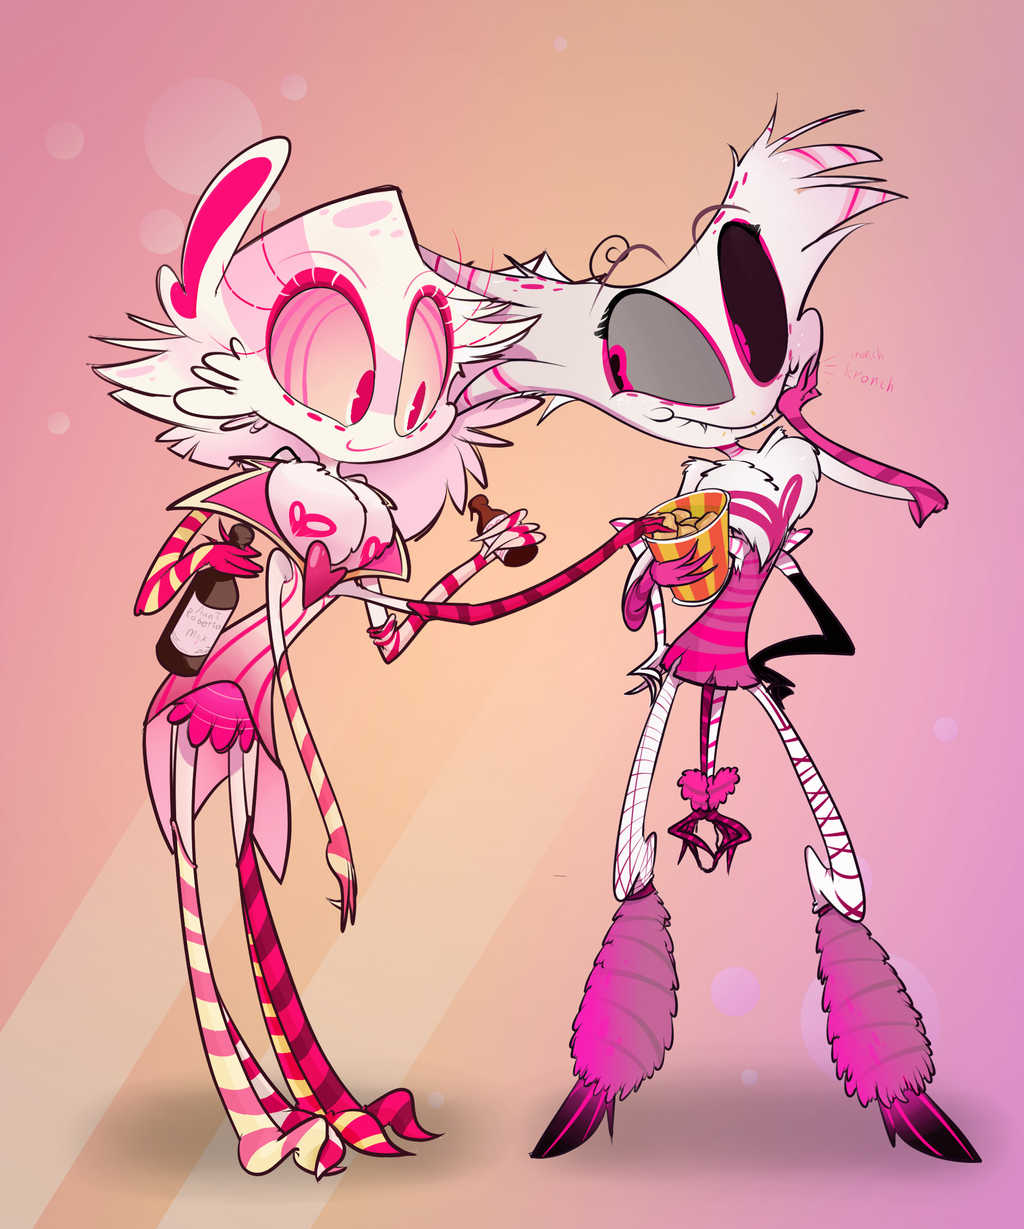 p207131-0-spidersiblingsbypsychohammerd8qky2o.png